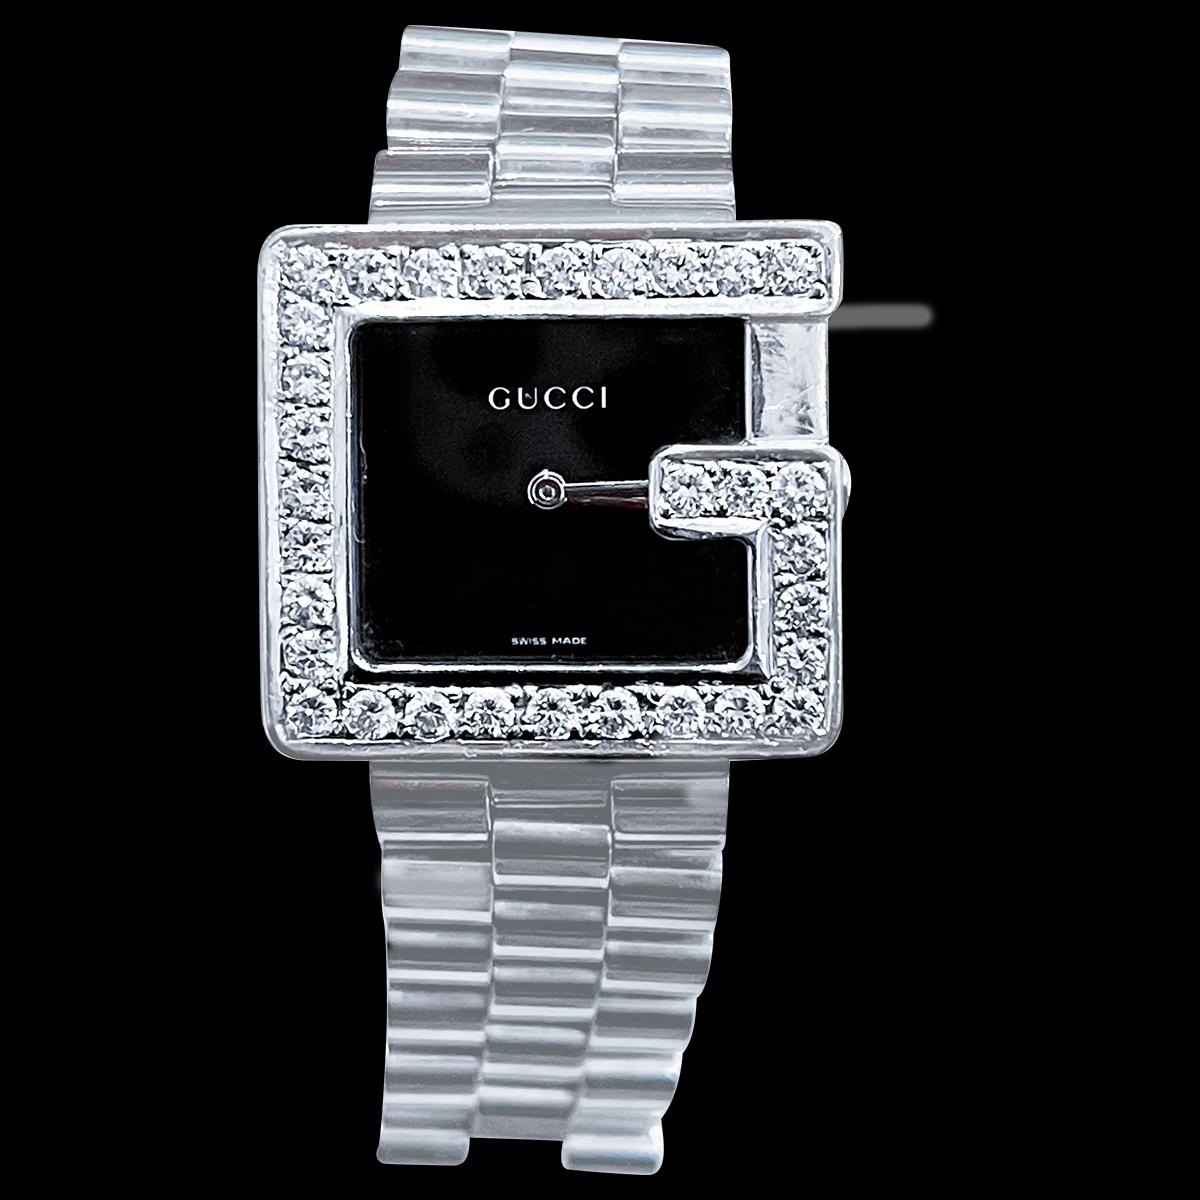 Auth Gucci stainless Steel diamond “G” Bezel watch
Gucci Silver Stainless Steel Black Dial 3600 Swiss Water Resistant Wrist Watch. 
 Pre-Owned
 Case Diameter: 32mm
 stainless steel 32 mm watch features:
Diamonds 
brand: Gucci

gender: